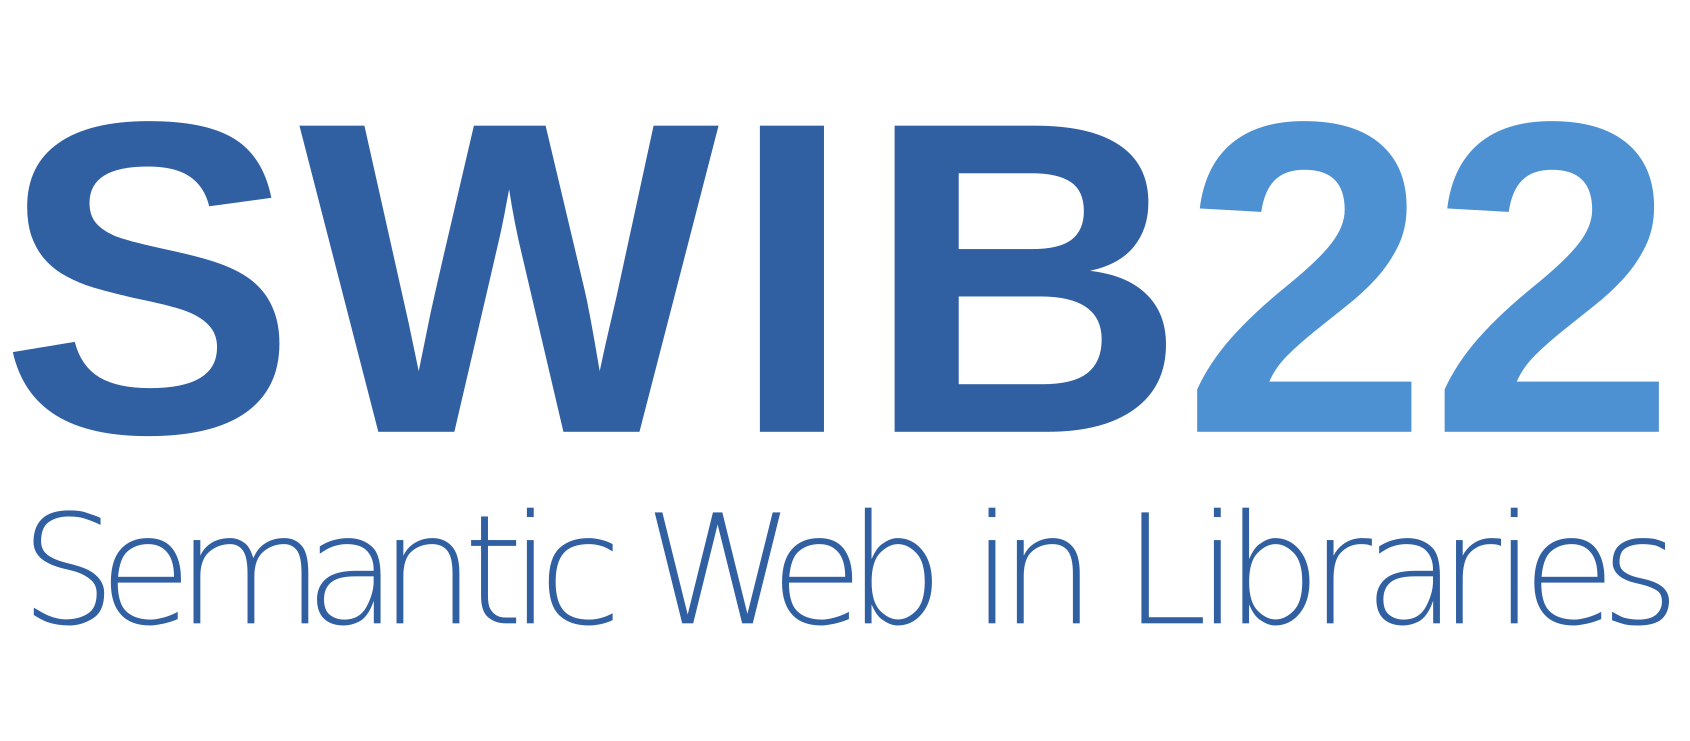 swib22 Semantic Web in Libraries conference